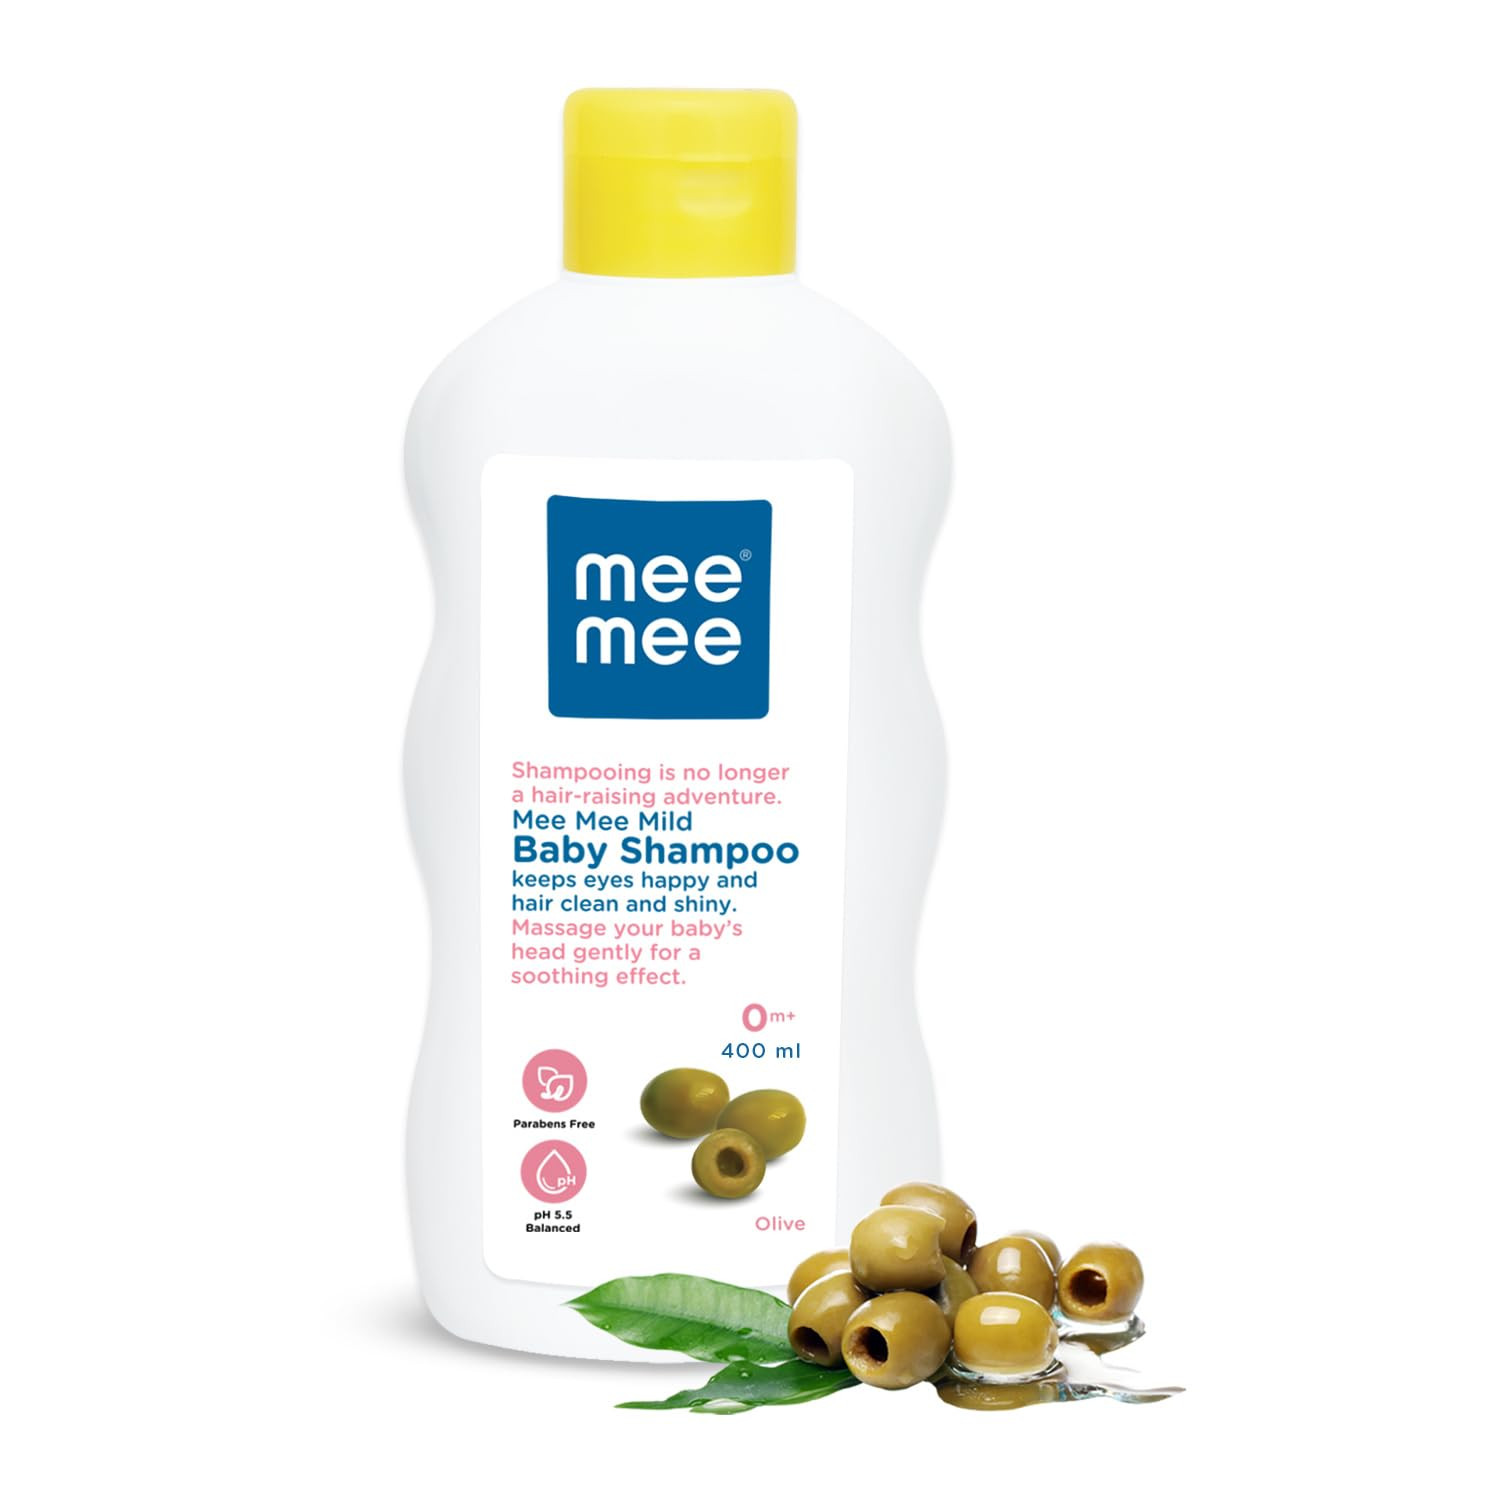 Mee Mee Gentle Baby Shampoo - Tear-Free Formula, Enriched with Olive Extracts, Nurturing for Infant Hair - From Birth Onwards, Dermatologist-Approved, (400ml)